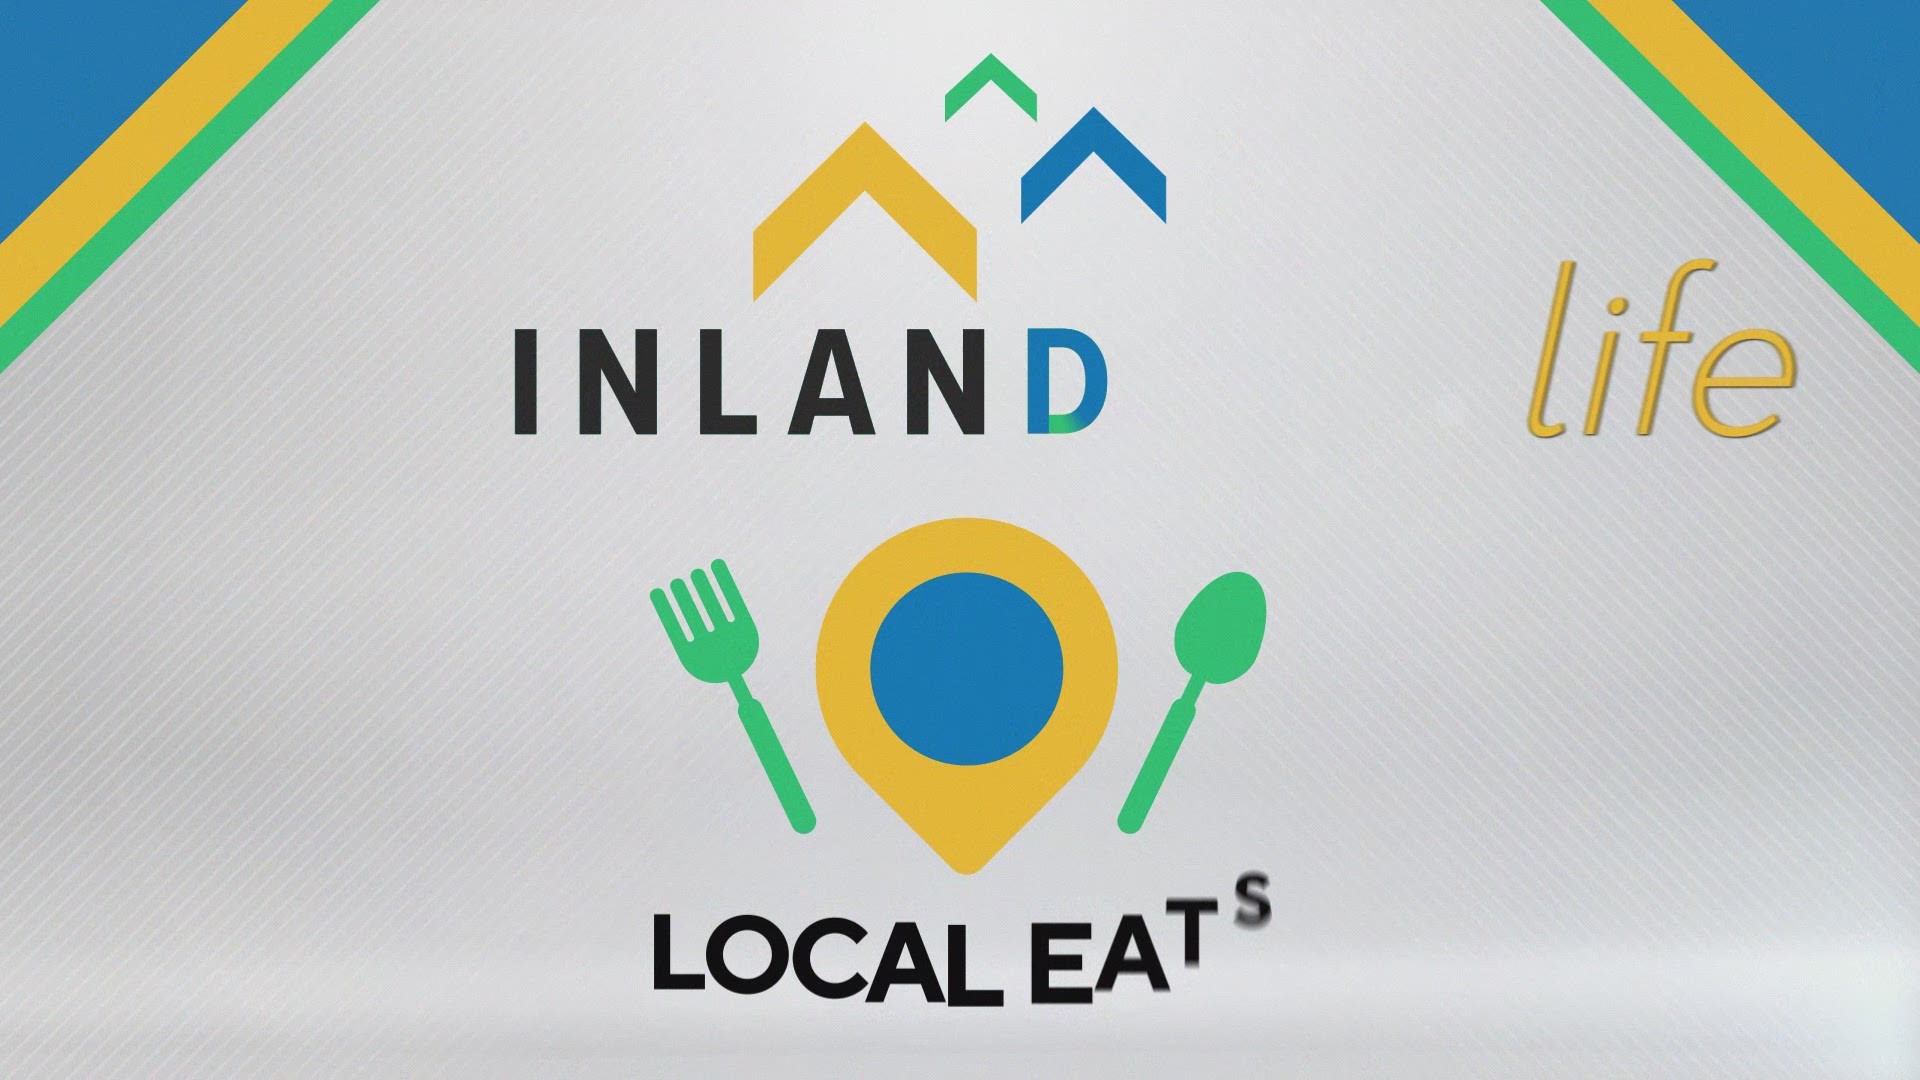 Our region is filled with many great locally owned restaurants. Inland Life- Local Eats will let you meet the owners and chefs who have created their great menus and